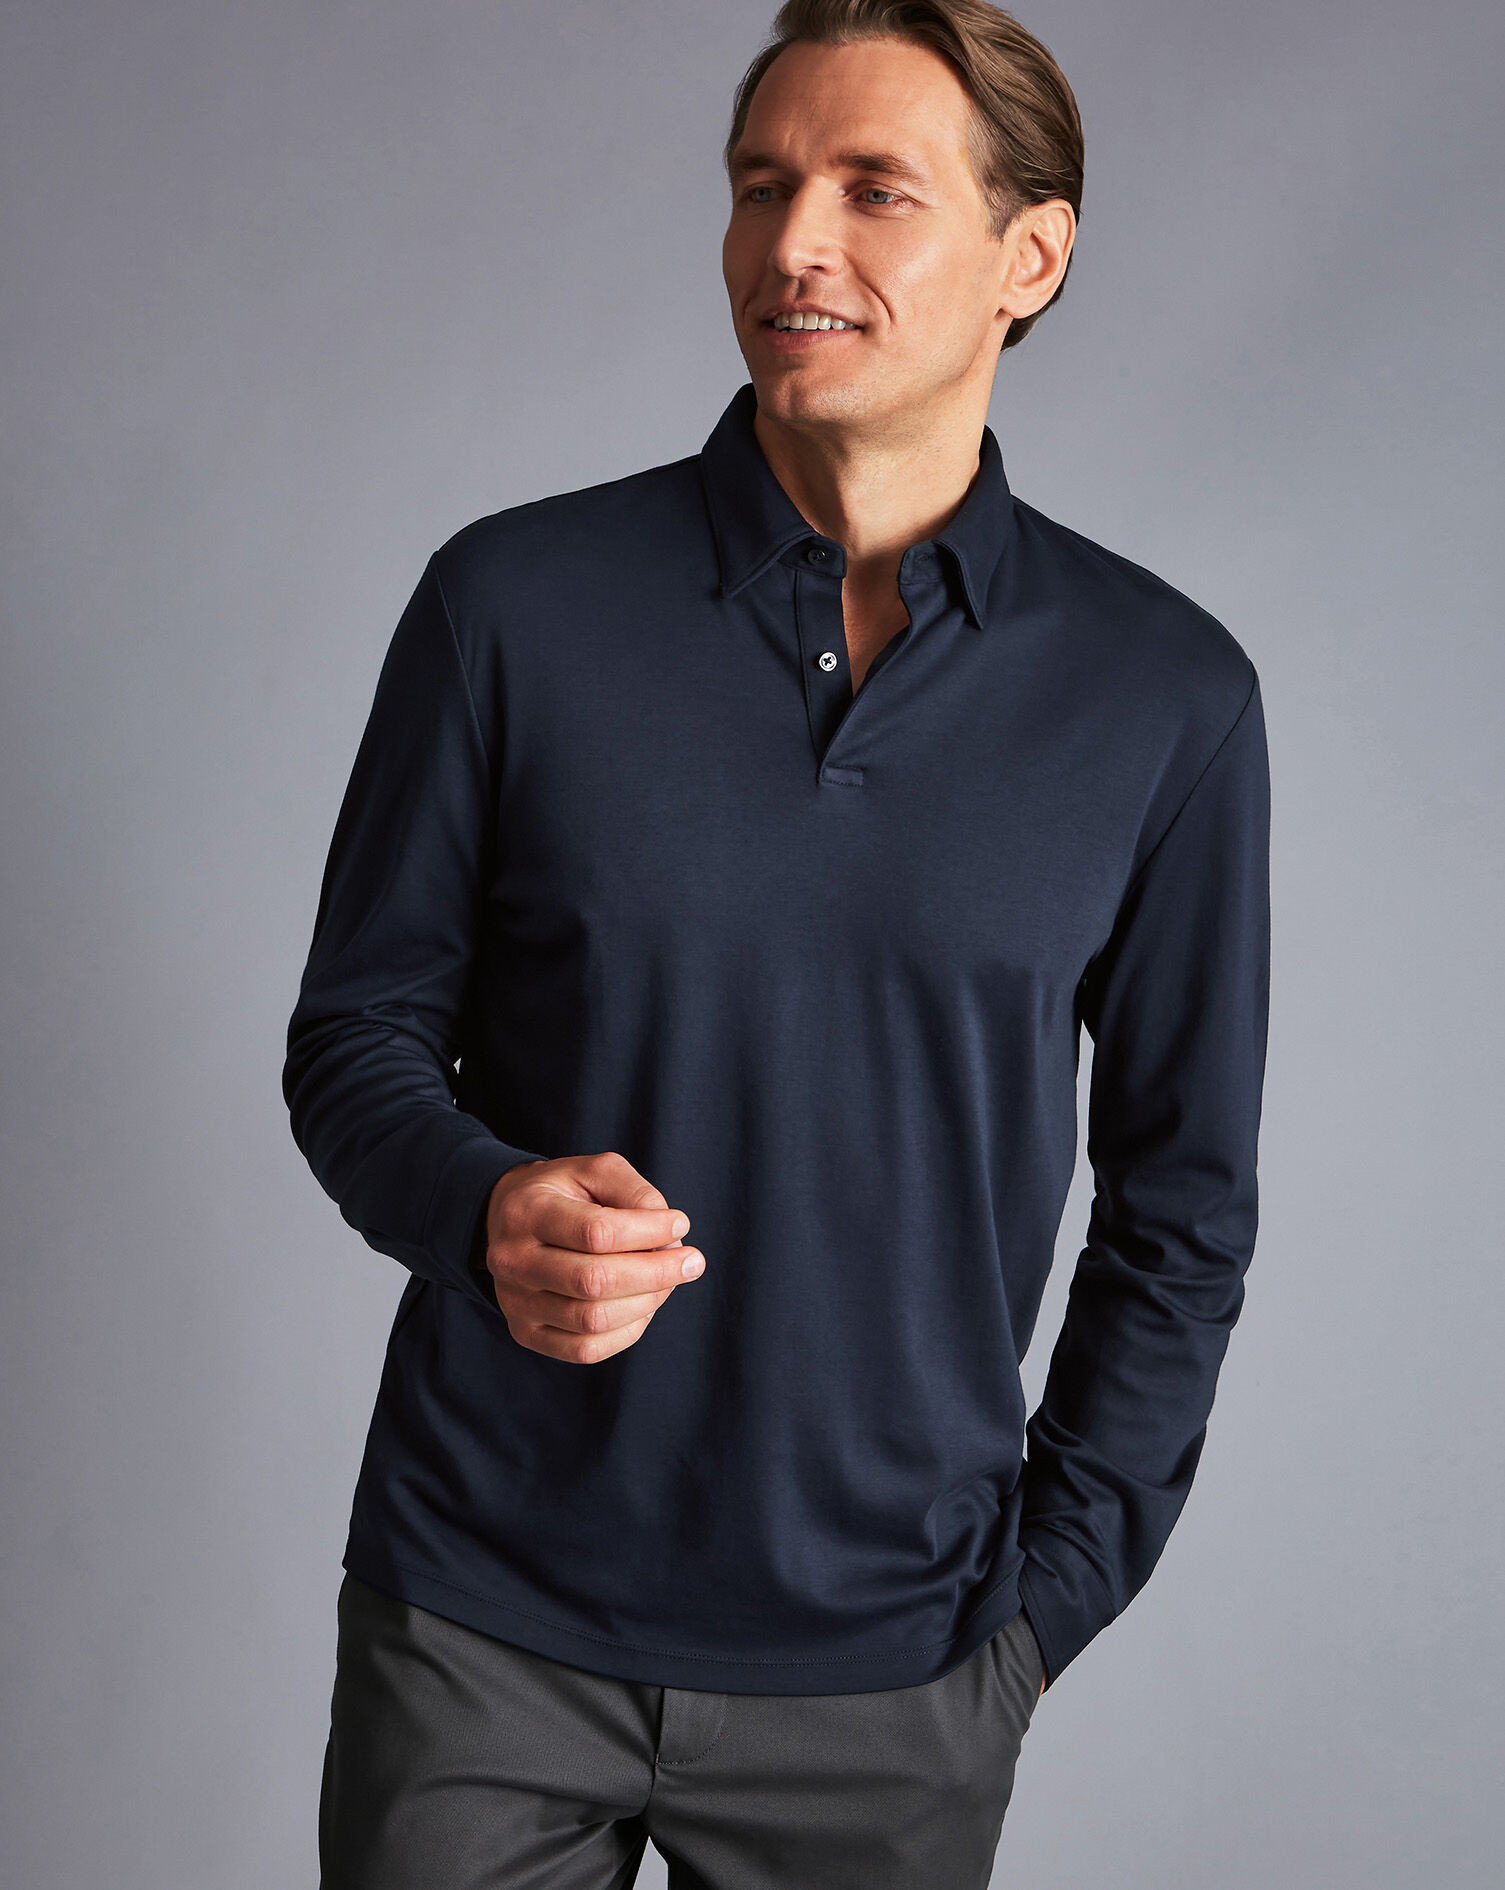 smart long sleeve polo shirts, significant discount 61% off - www ...